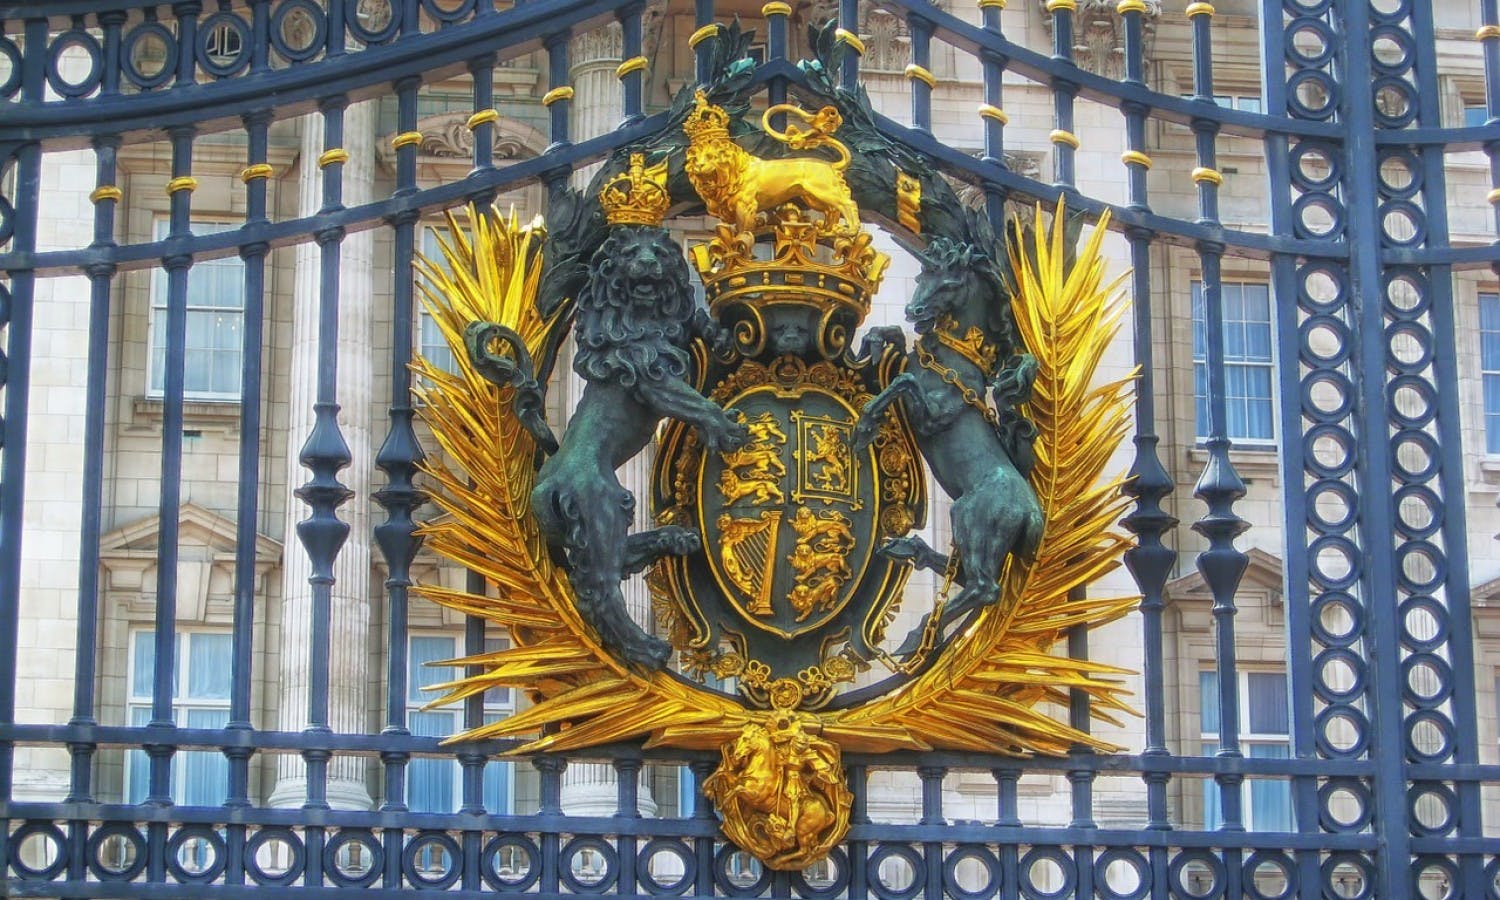 Buckingham Palace - Tour and Tickets - Gate Coat of Arms